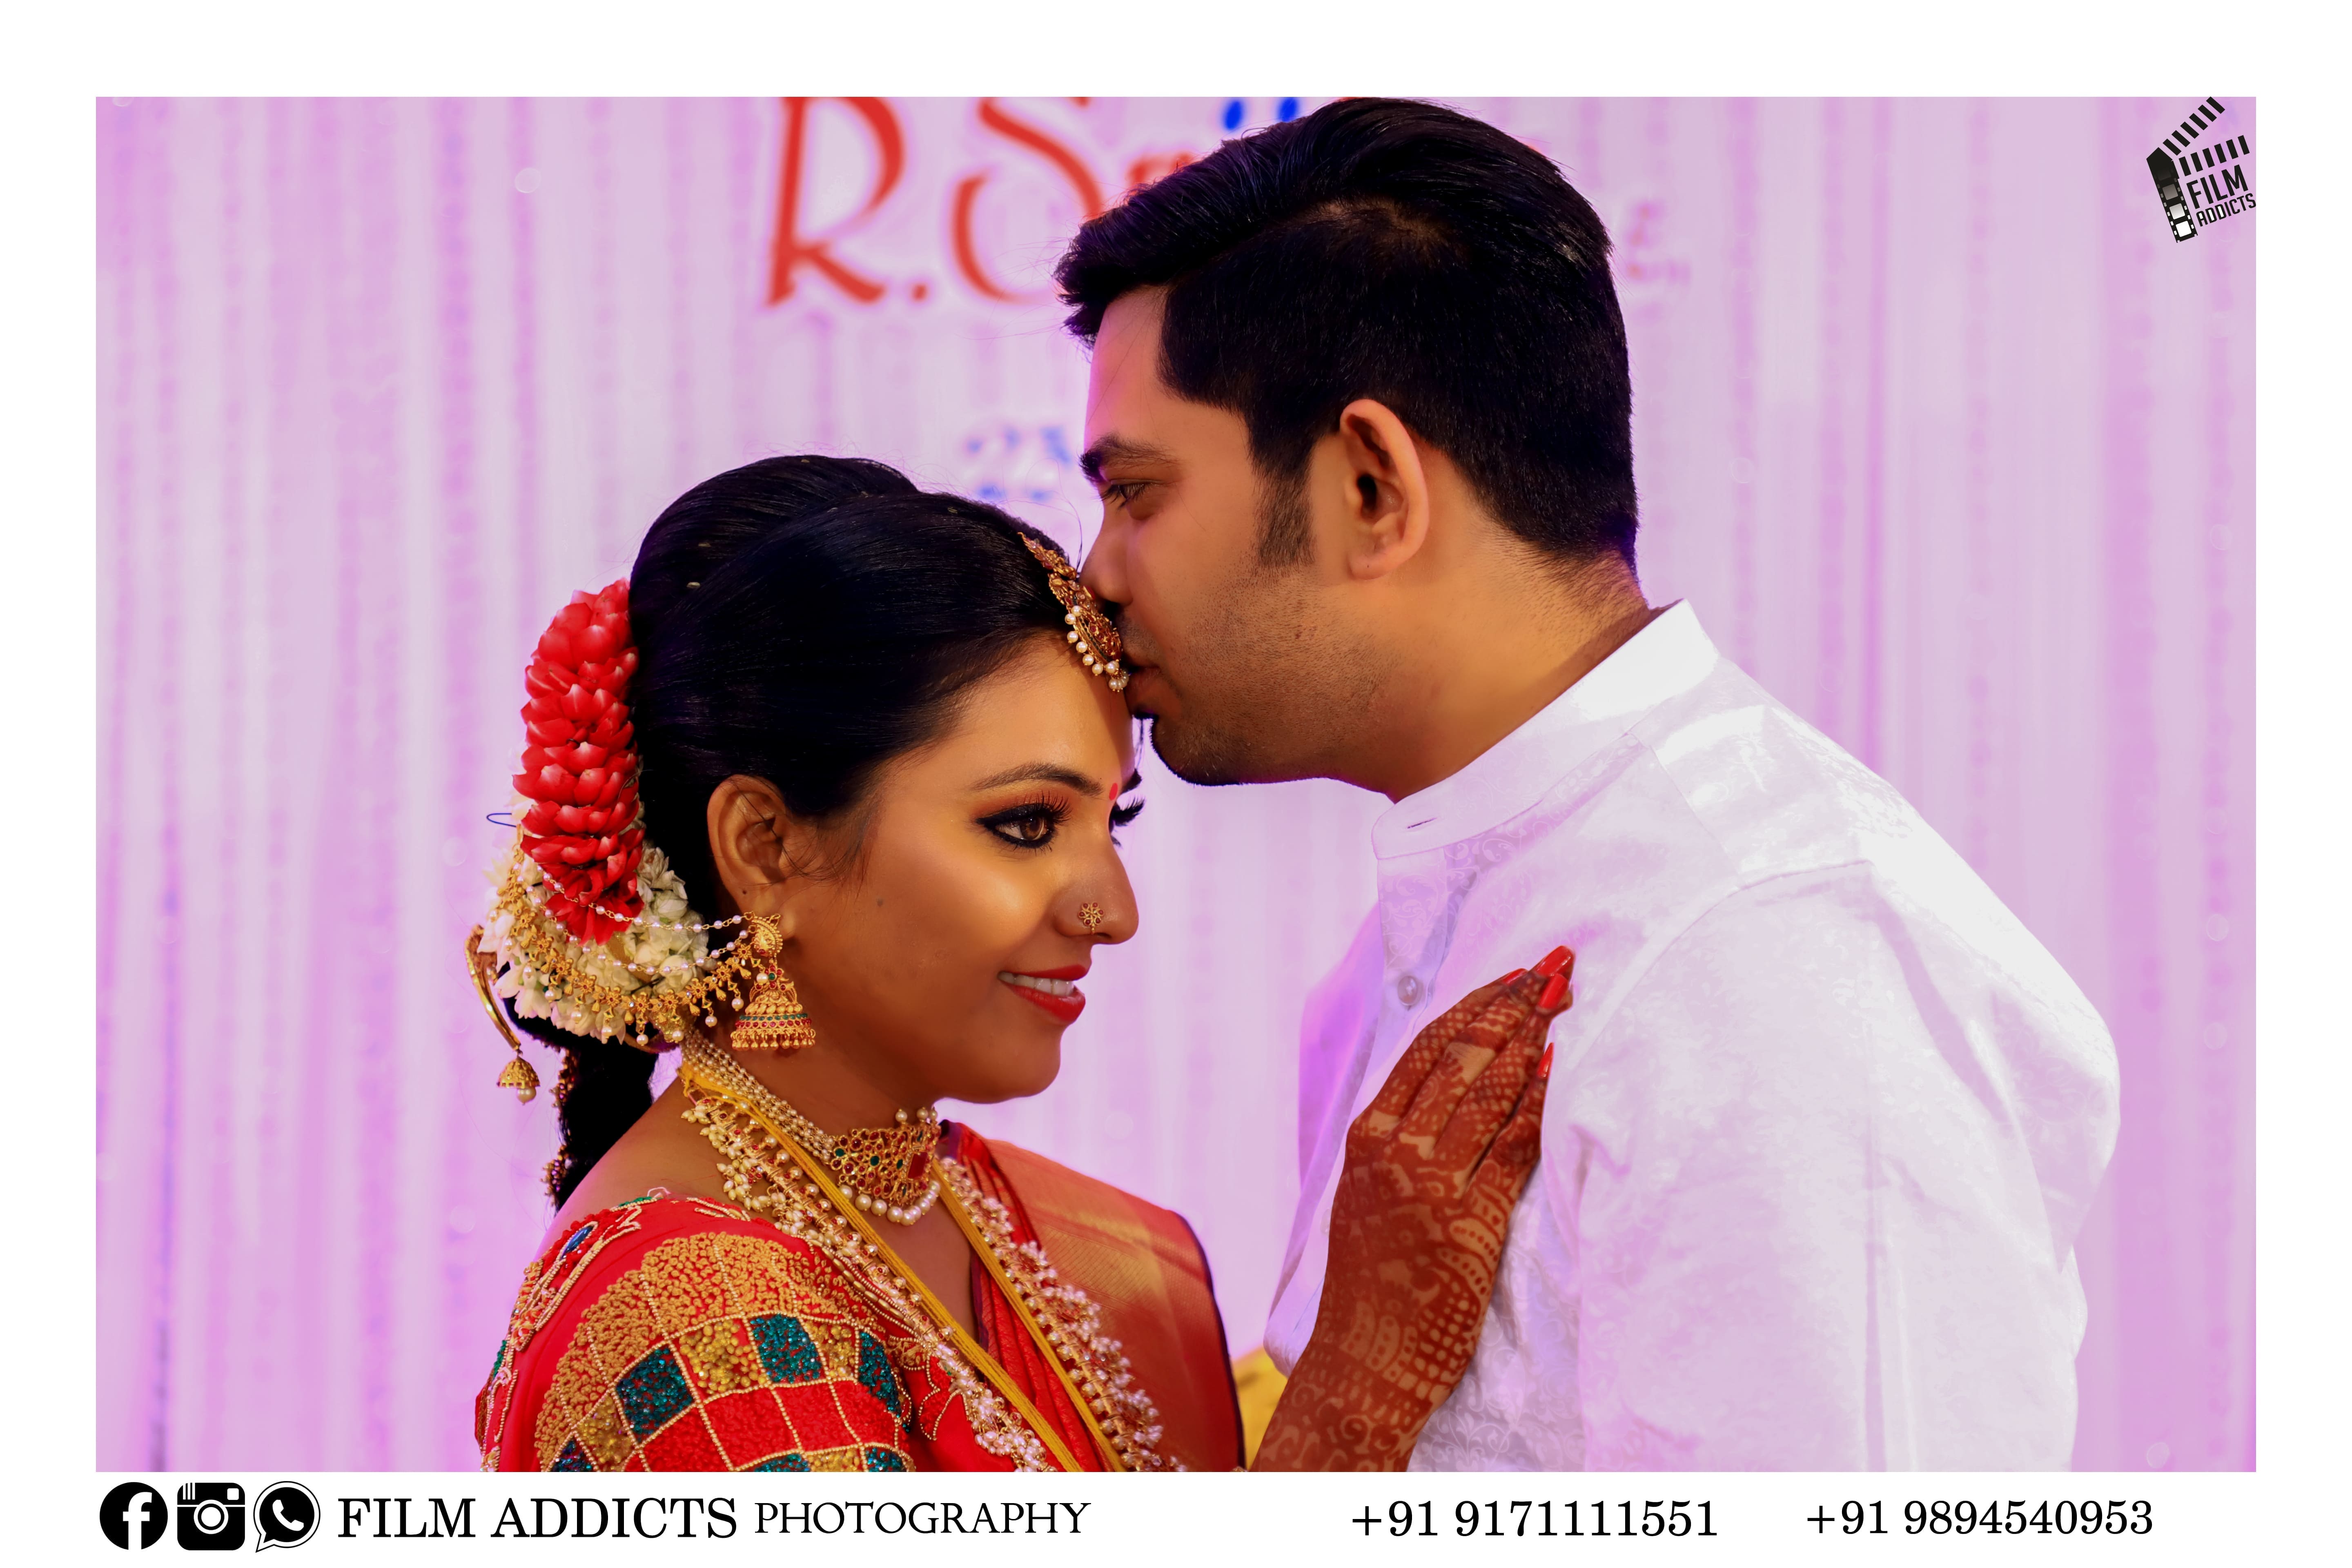 Best Candid Photograpers in Rajapalayam, Best Wedding Photographers in Rajapalayam, Best candid photographers in Rajapalayam, Best Wedding Candid photographers in Rajapalayam, Wedding Candid Moments, FilmAddicts, Photography, FilmAddictsPhotography, best wedding in Rajapalayam, Best Candid shoot in Rajapalayam, best moment, Best wedding moments, Best wedding photography in Rajapalayam, Best wedding videography in Rajapalayam, Best couple shoot, Best candid, Best wedding shoot, Best wedding candid, best marraige photographers in Rajapalayam, best marraige photography in Rajapalayam, best candid photography, best Rajapalayam photography, Rajapalayam, Rajapalayam photography, Rajapalayam couples, candid shoot, candid, tamilnadu wedding photography, best photographers in Rajapalayam, Best Candid Photograpers in Virudhunagar, Best Wedding Photographers in Virudhunagar, Best candid photographers in Virudhunagar, Best Wedding Candid photographers in Virudhunagar, Wedding Candid Moments, FilmAddicts, Photography, FilmAddictsPhotography, best wedding in Virudhunagar, Best Candid shoot in Virudhunagar, best moment, Best wedding moments, Best wedding photography in Virudhunagar, Best wedding videography in Virudhunagar, Best couple shoot, Best candid, Best wedding shoot, Best wedding candid, best marraige photographers in Virudhunagar, best marraige photography in Virudhunagar, best candid photography, best Virudhunagar photography, Virudhunagar, Virudhunagar photography, Virudhunagar couples, candid shoot, candid, tamilnadu wedding photography, best photographers in Virudhunagar, tamilnadu